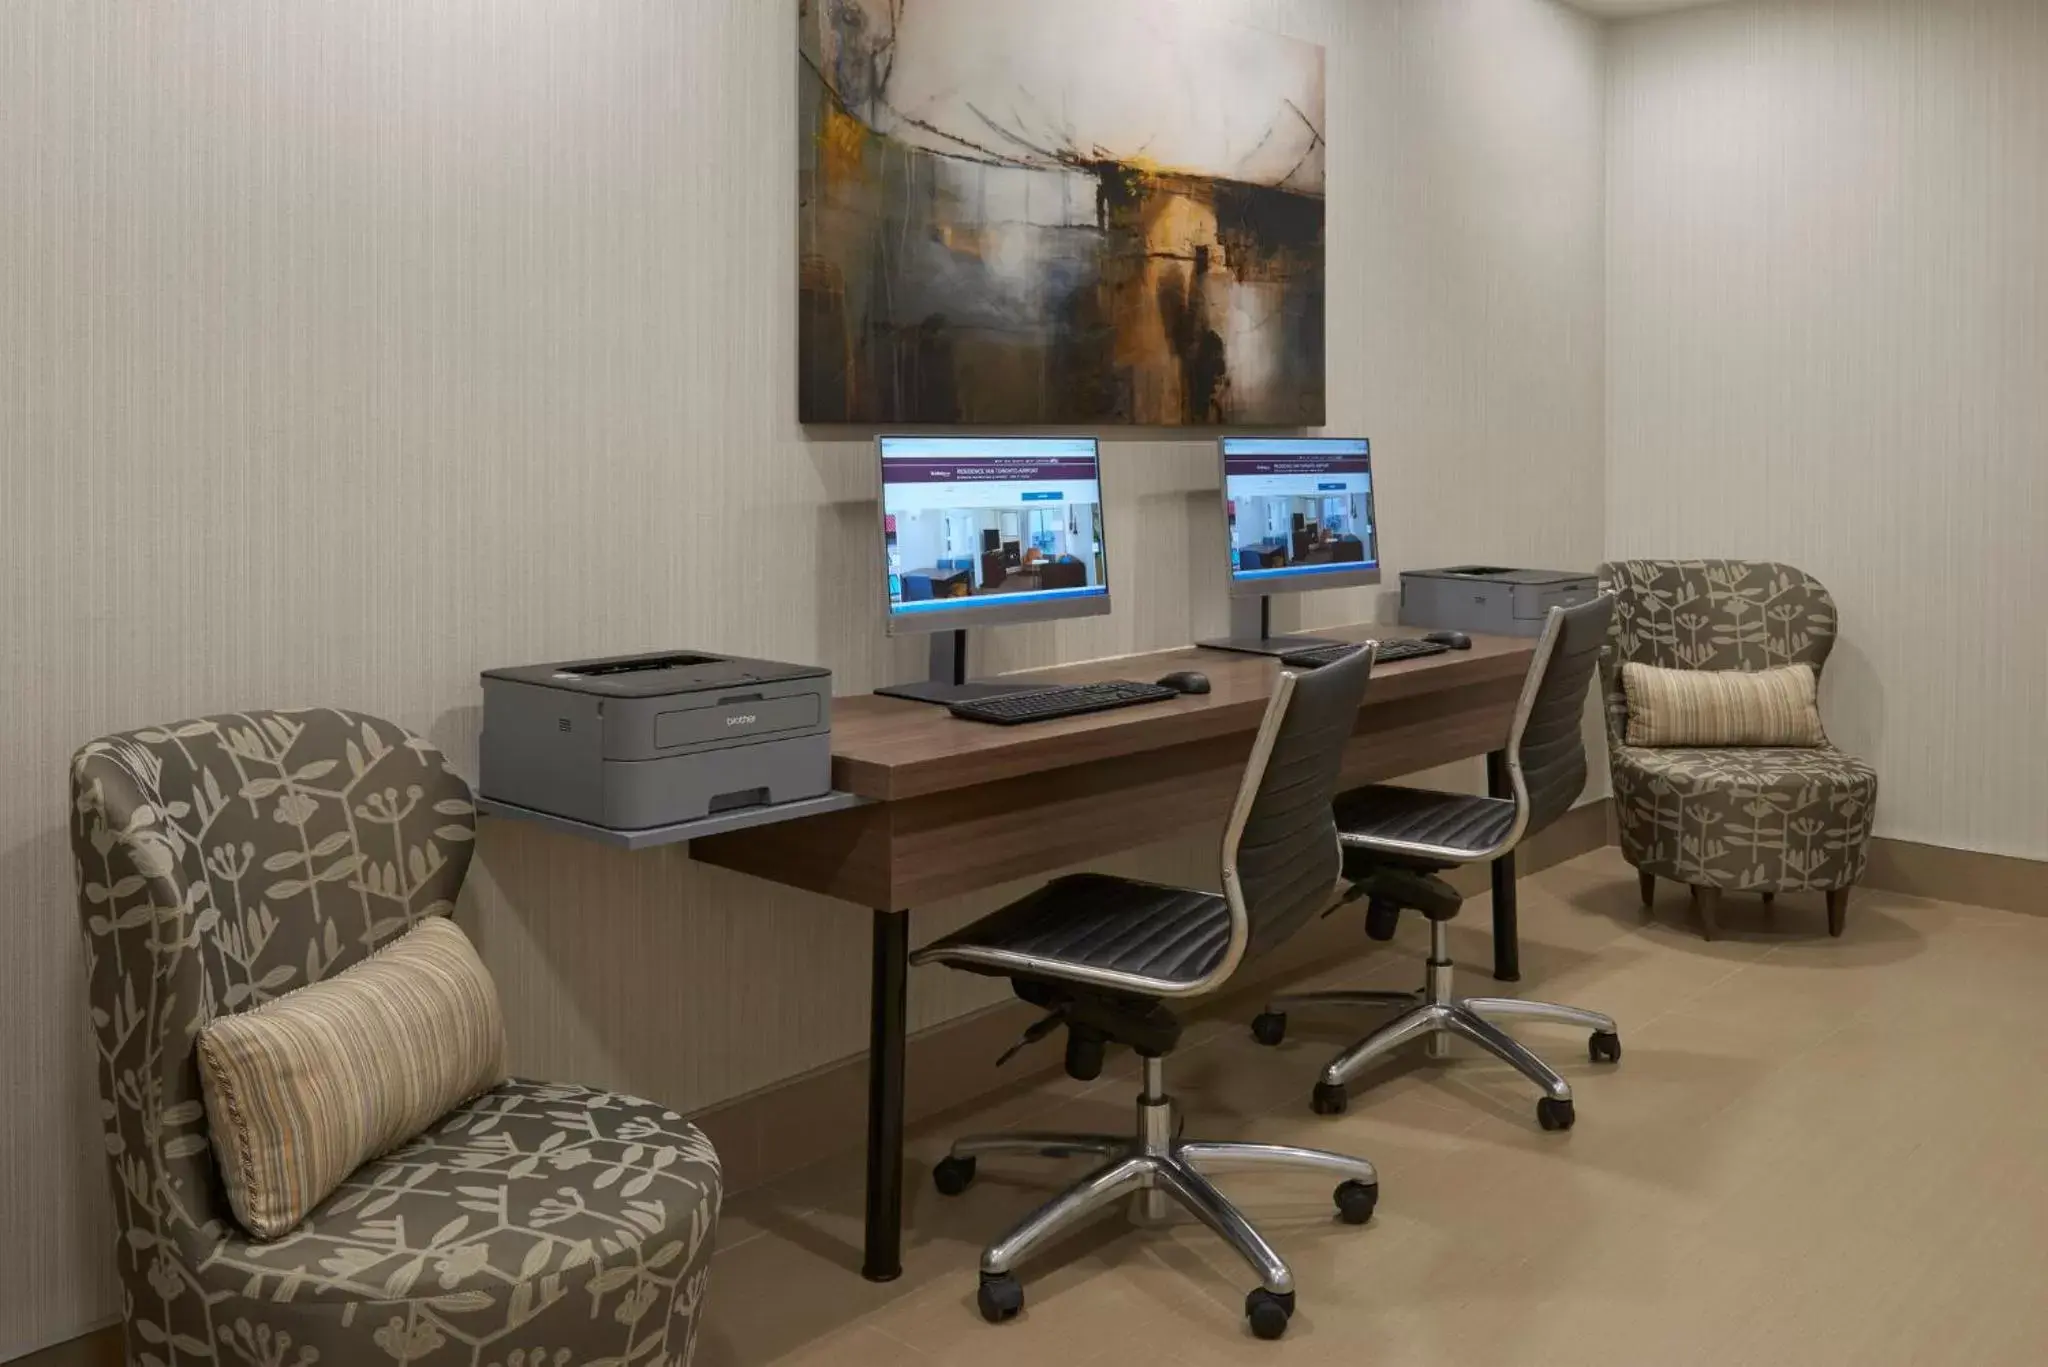 Business facilities in Residence Inn by Marriott Toronto Airport